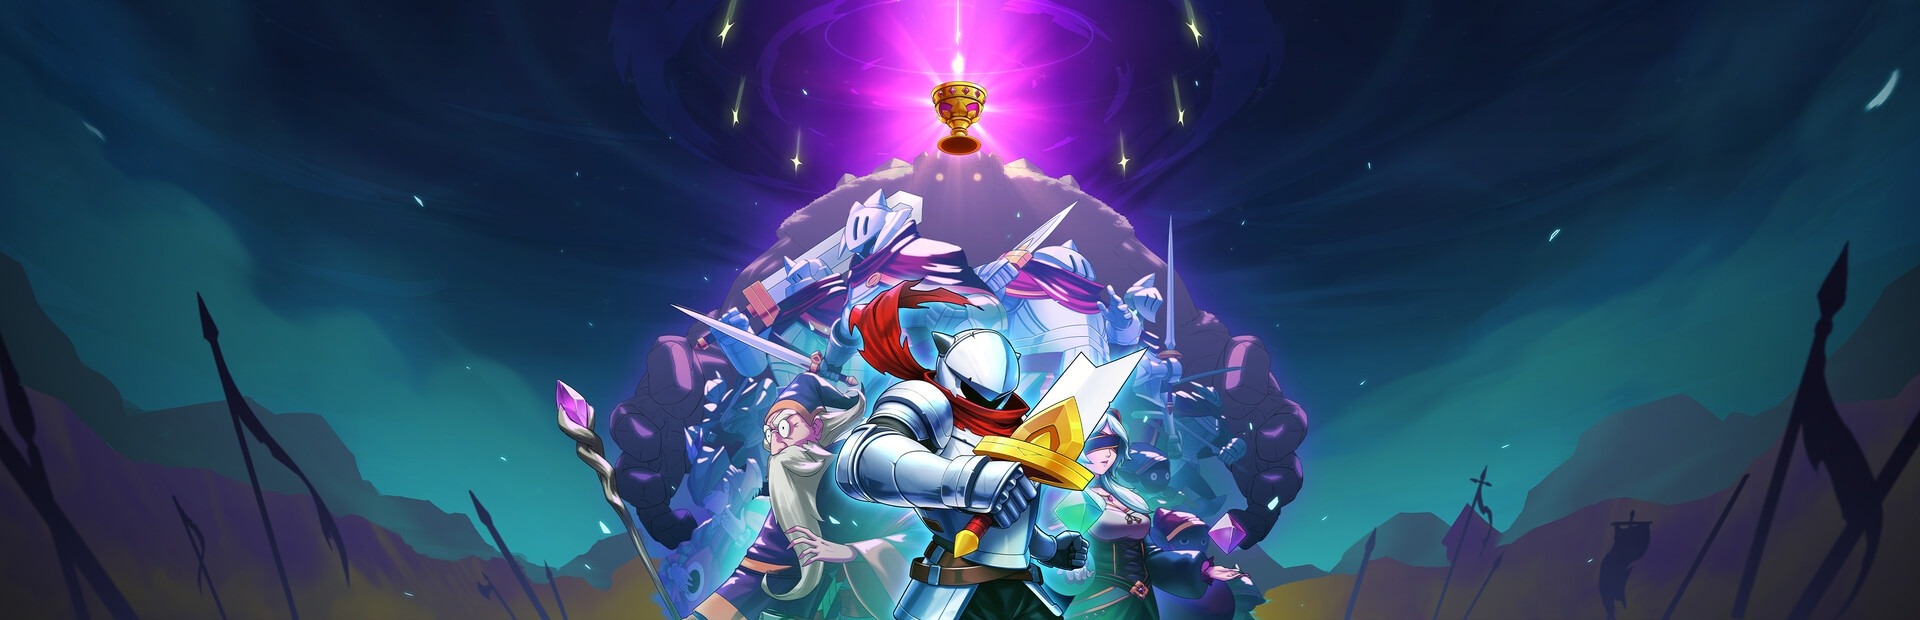 free for apple download Knight vs Giant: The Broken Excalibur